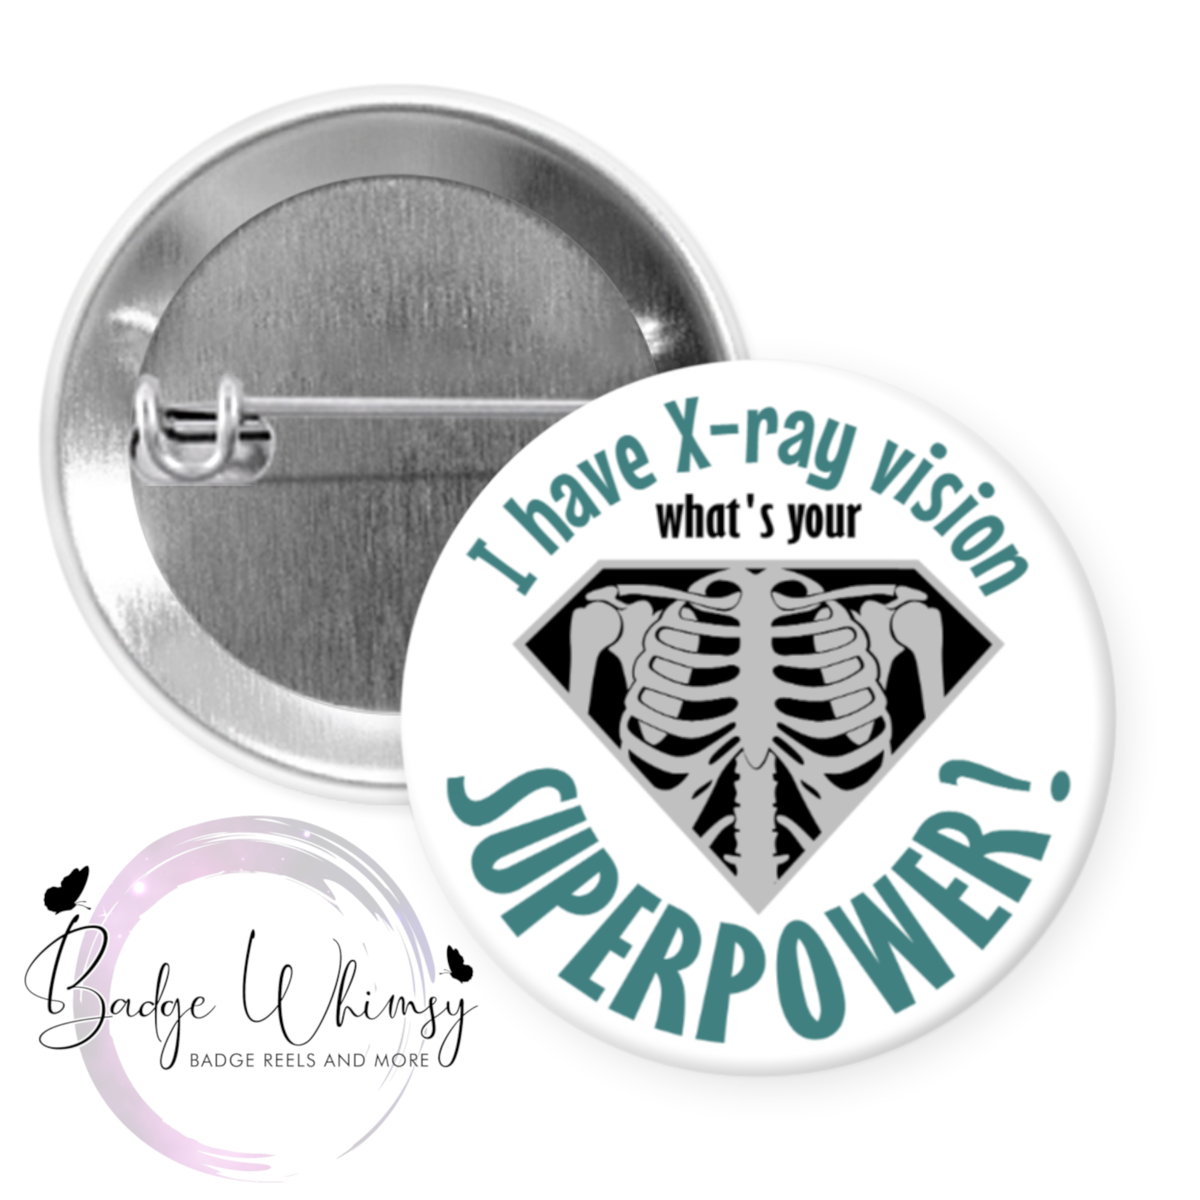 I have X-ray vision - What's Your Superpower-Pin, Magnet or Badge Hold